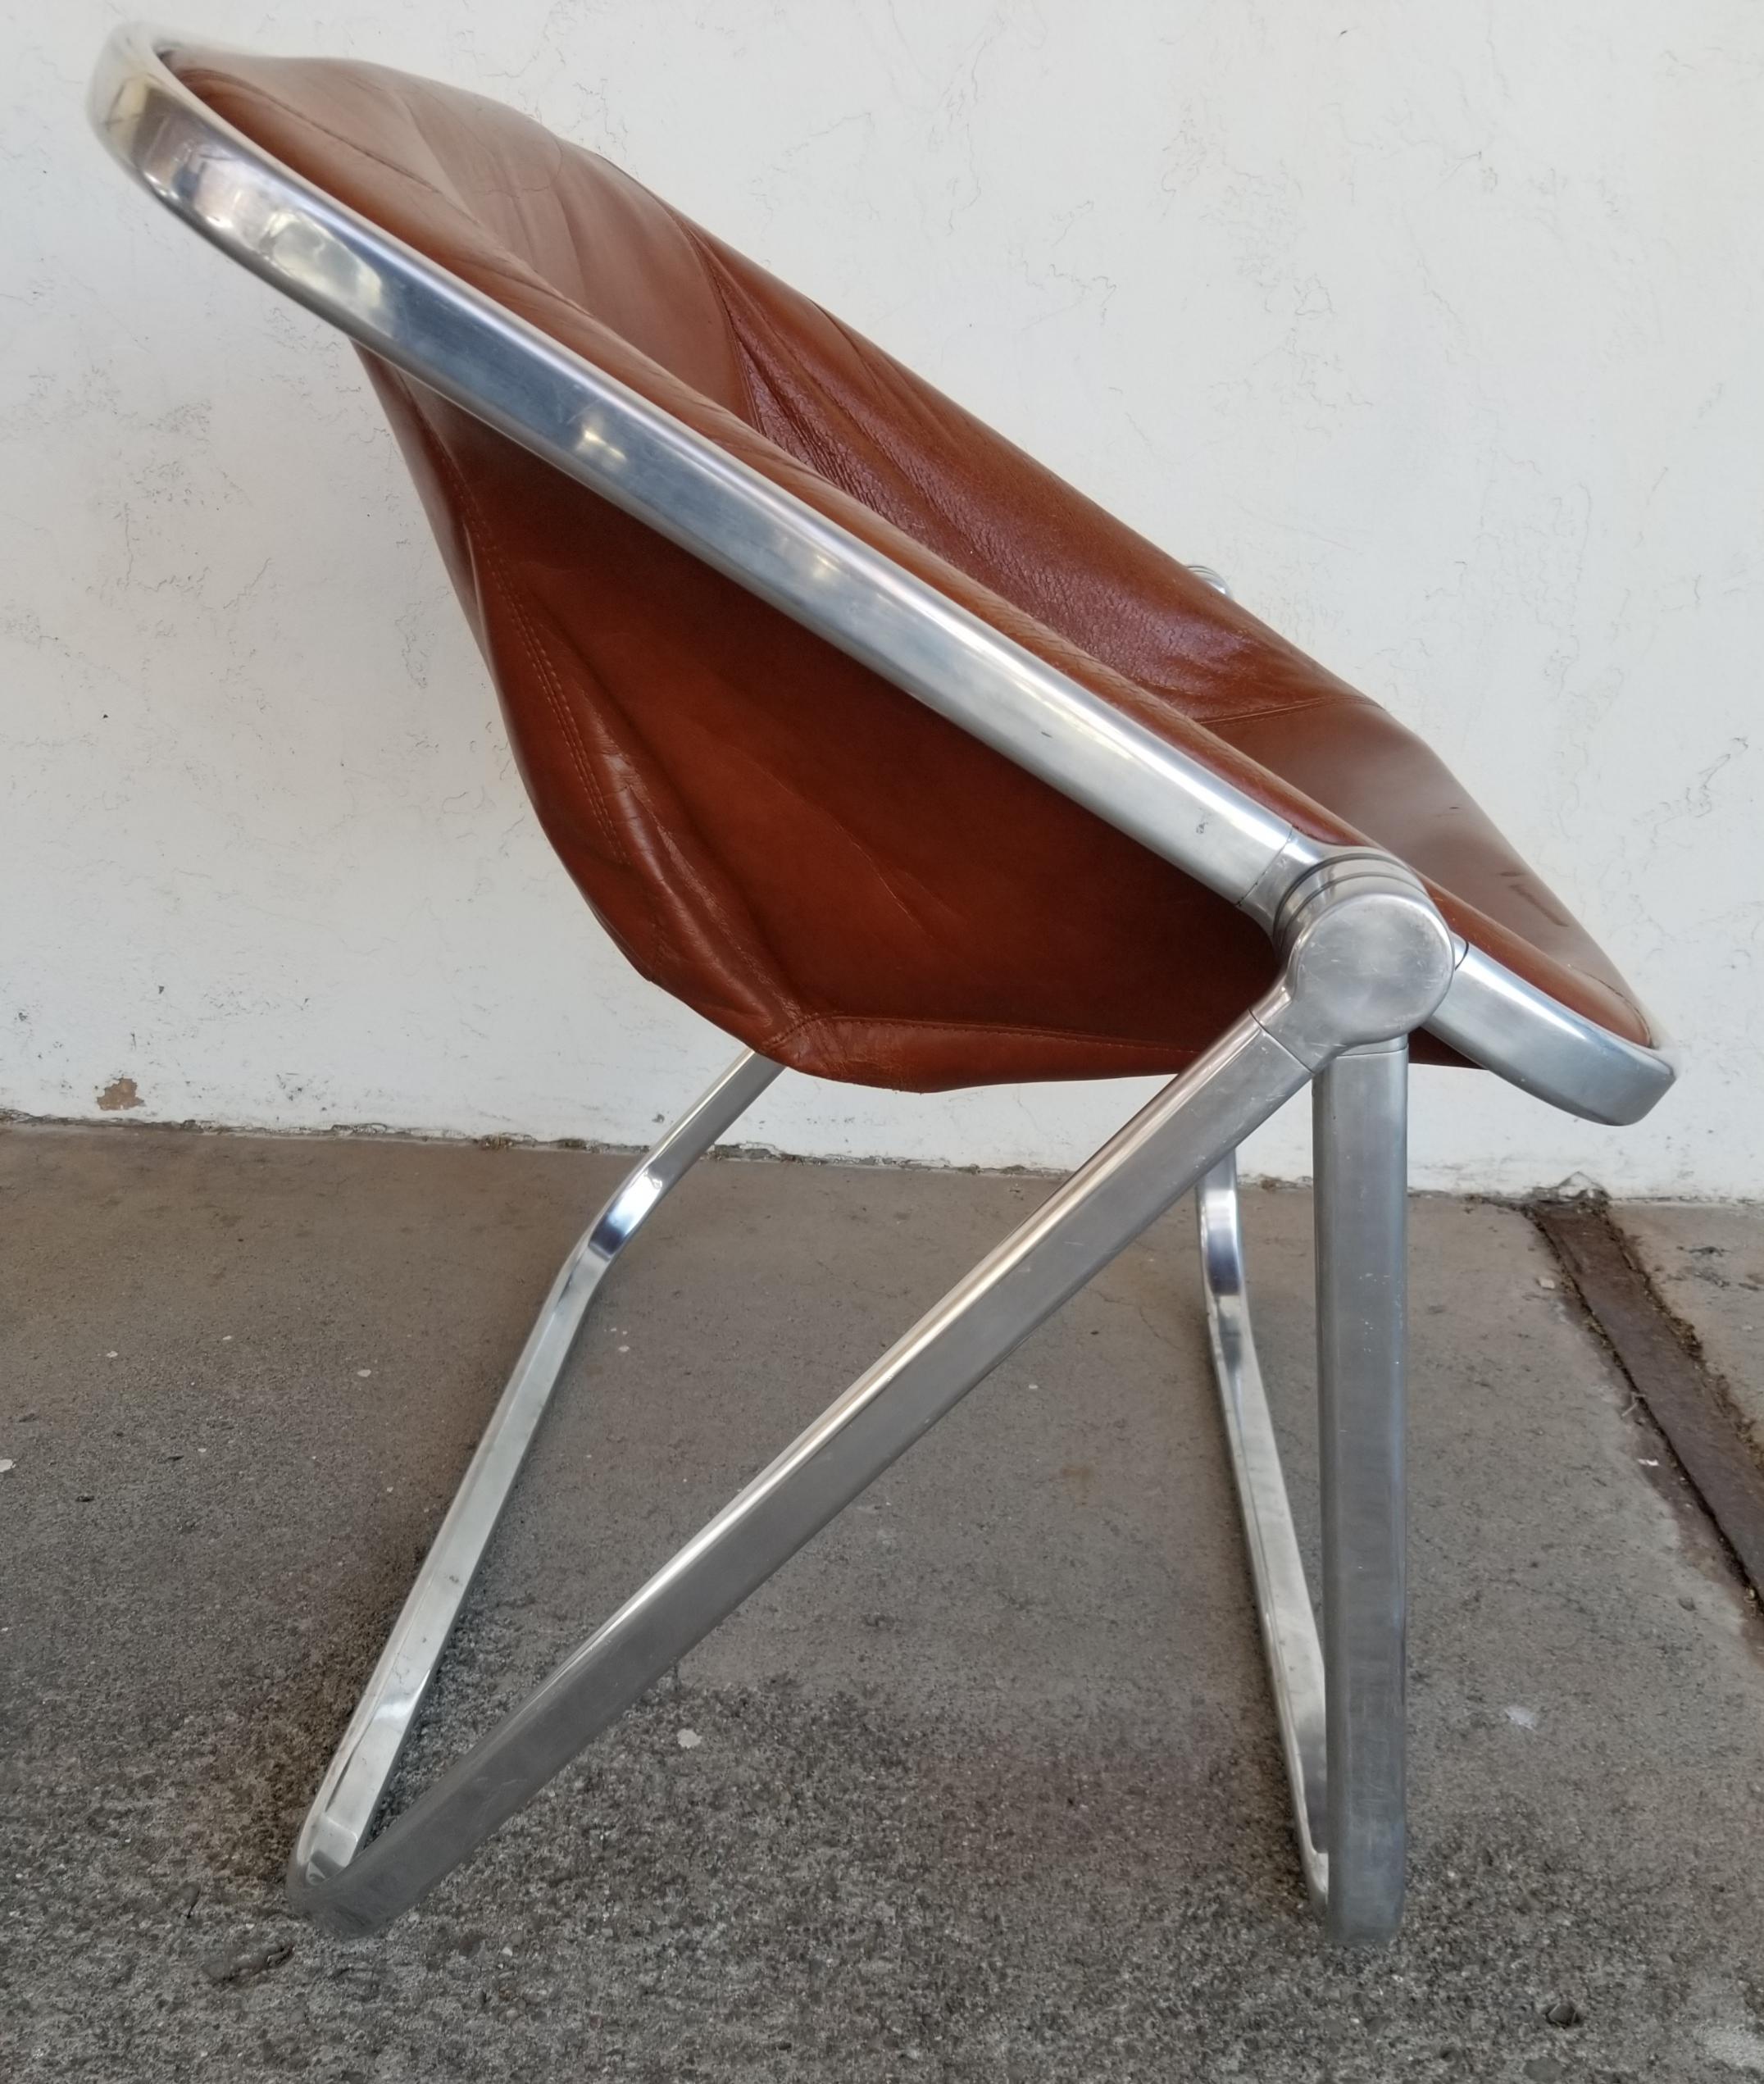 1970's chrome & leather folding chair designed by Giancarlo Piretti for Castelli. Made in Italy, circa. 1970's. Good original vintage condition with light age appropriate wear. Retains Castelli label.